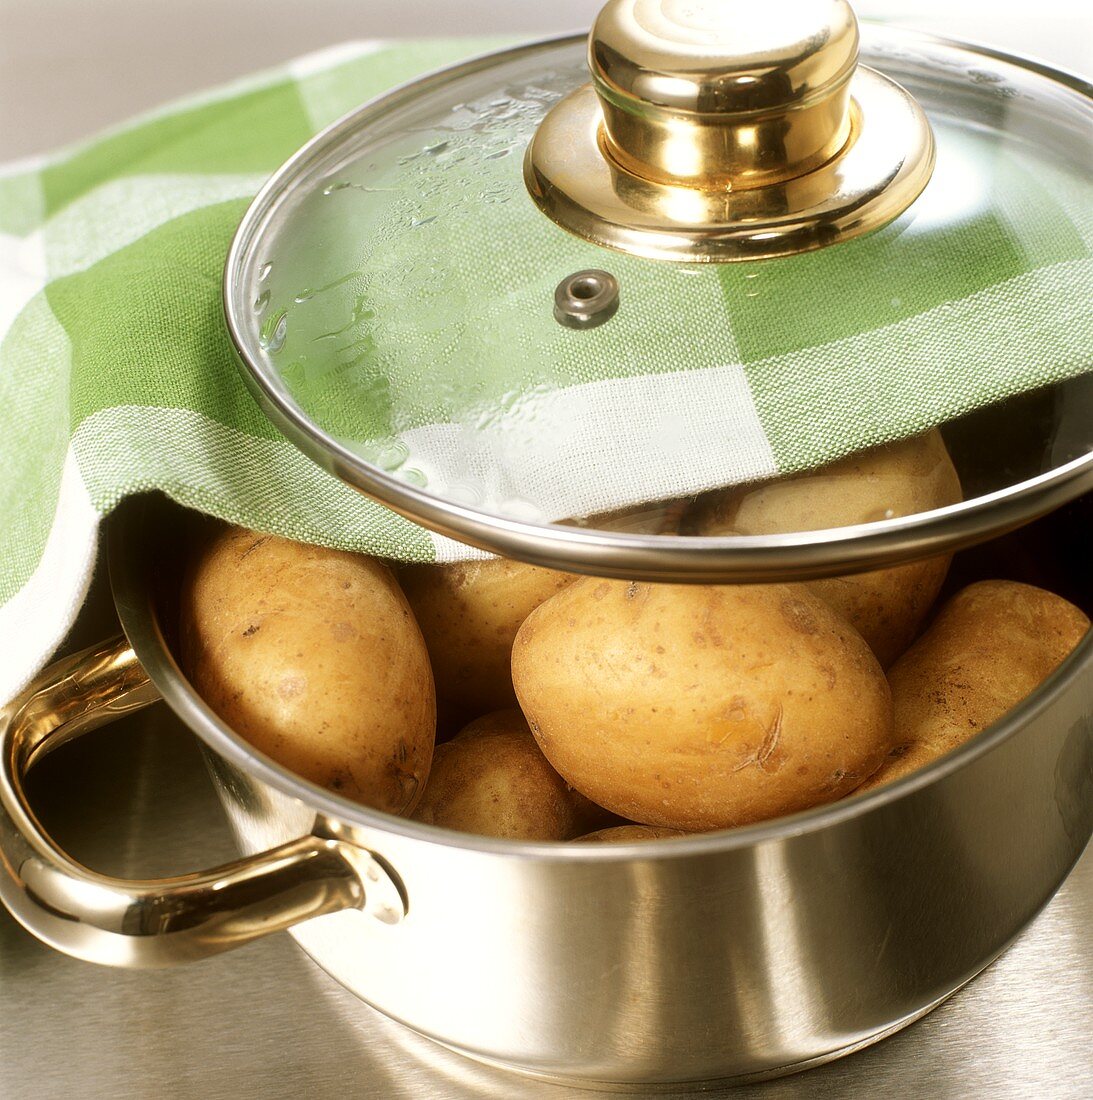 Potatoes in stainless steel pan with glass lid & fabric napkin